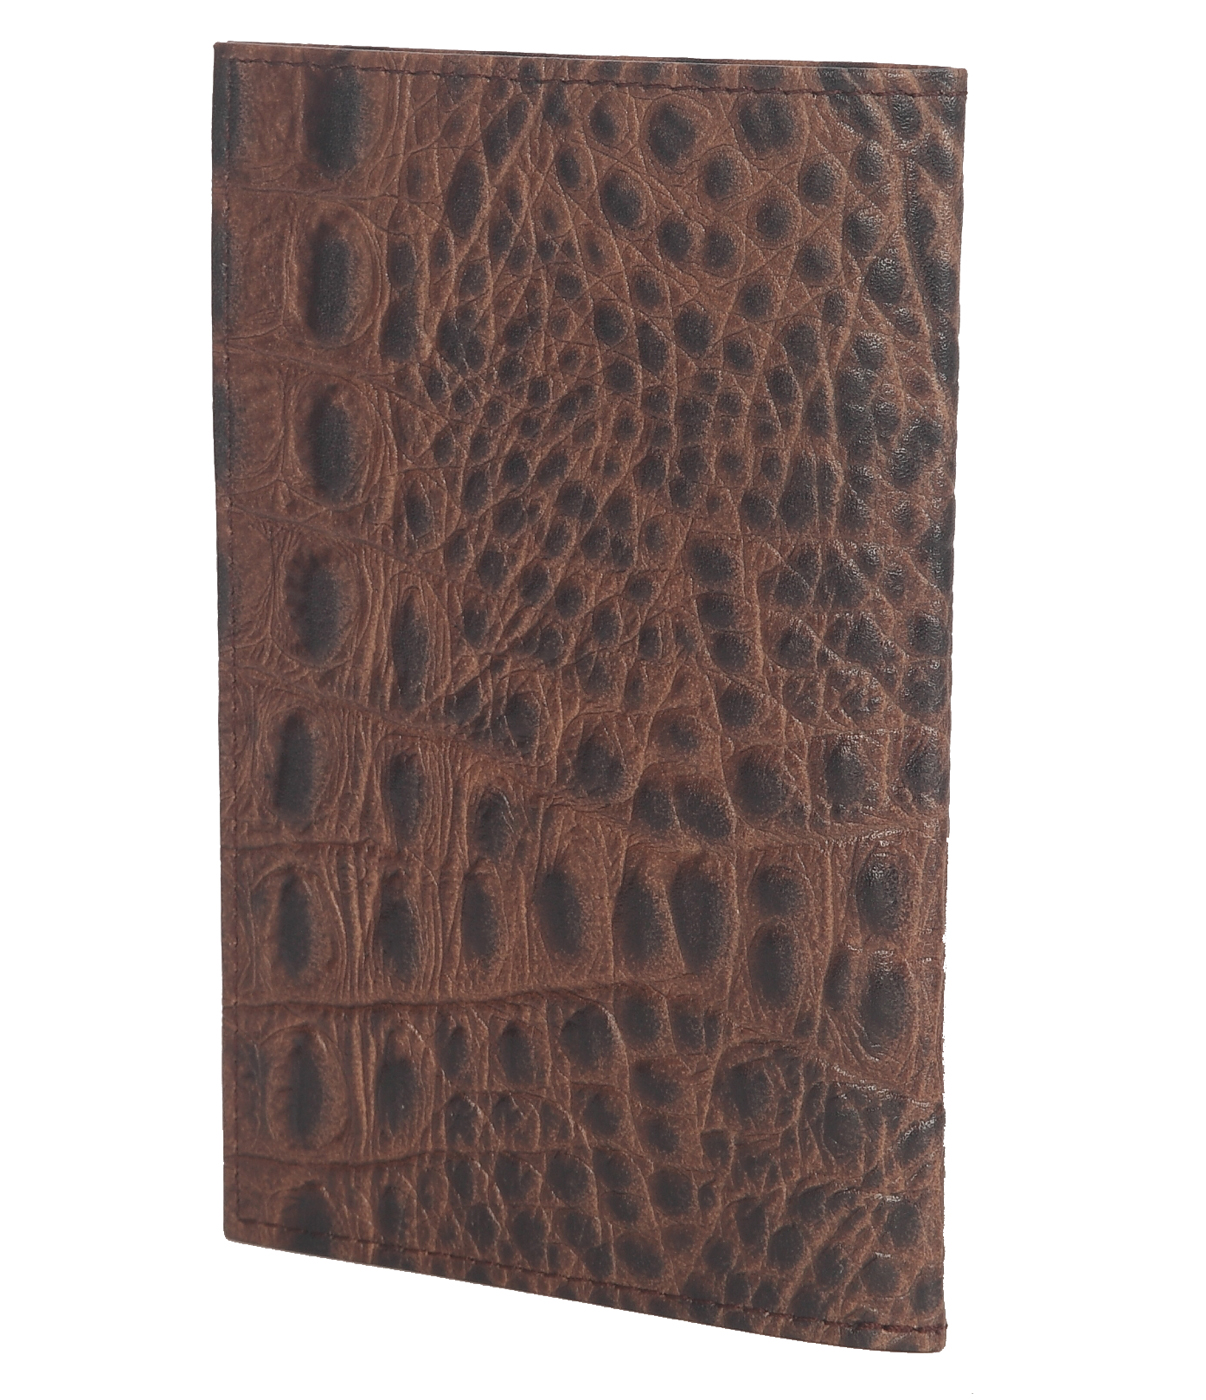 W251--Passport cover in Genuine Leather - Brown.